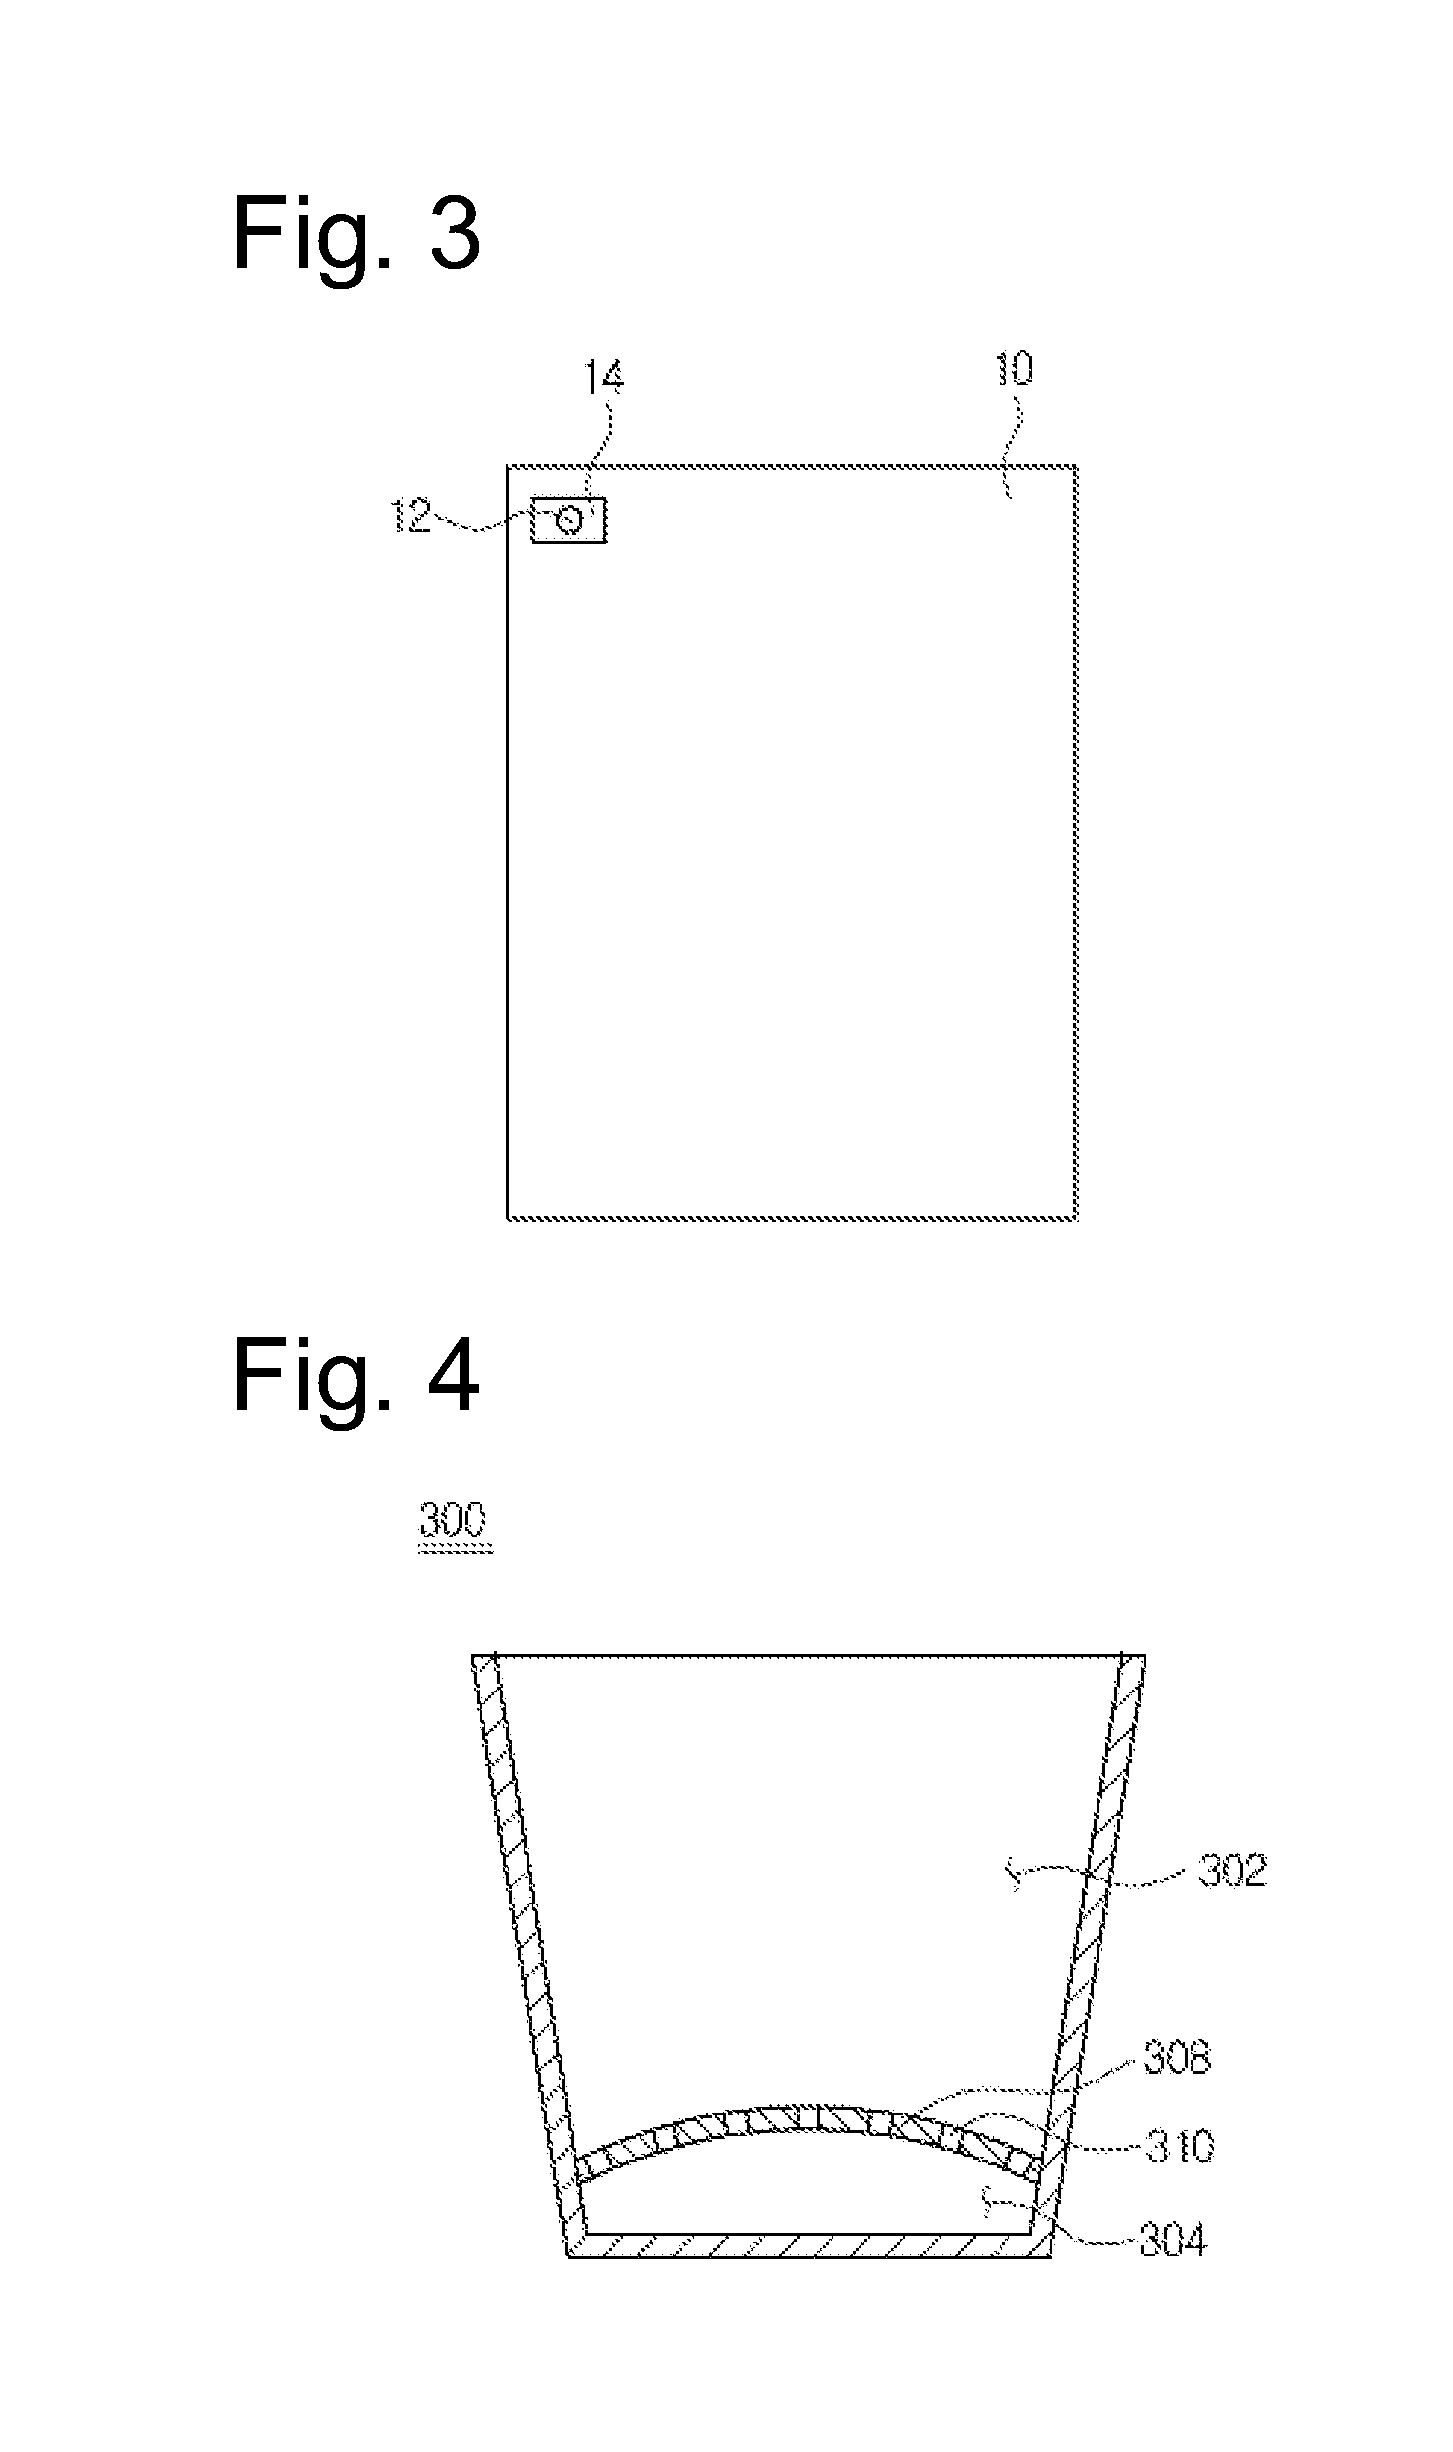 Device and Method for the Automatic Counting of Medical Gauze